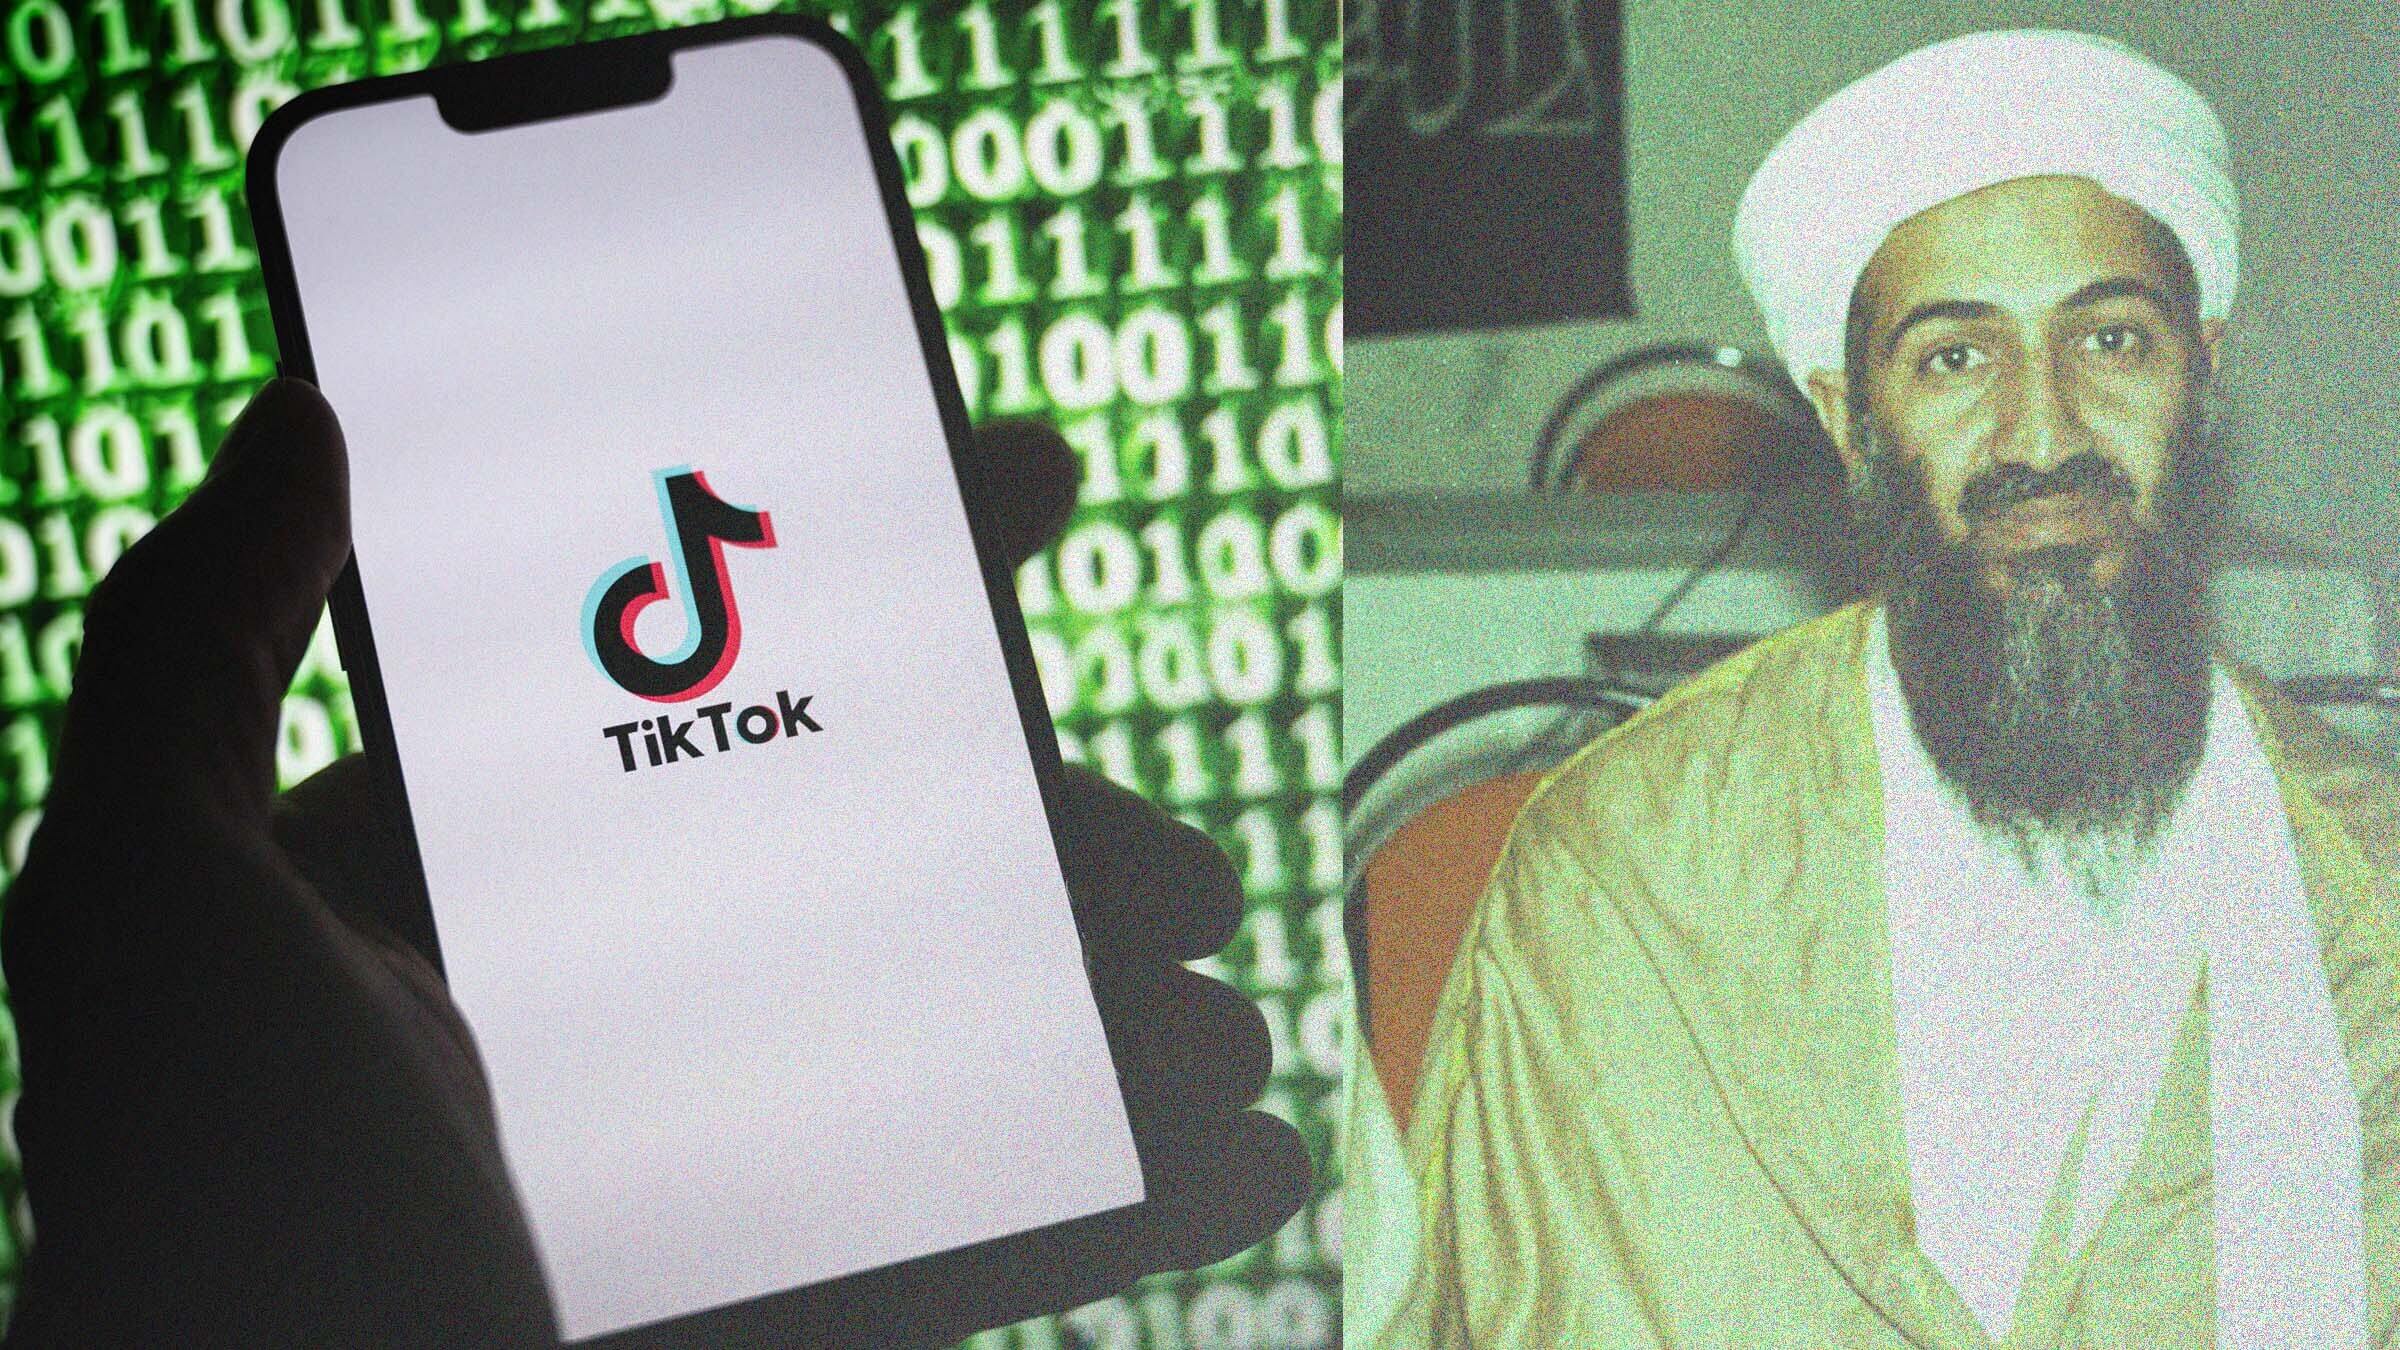 A photo of Osama bin Laden, the former head of al-Qaeda who planned the 9/11 attacks, seen next to an image of TikTok